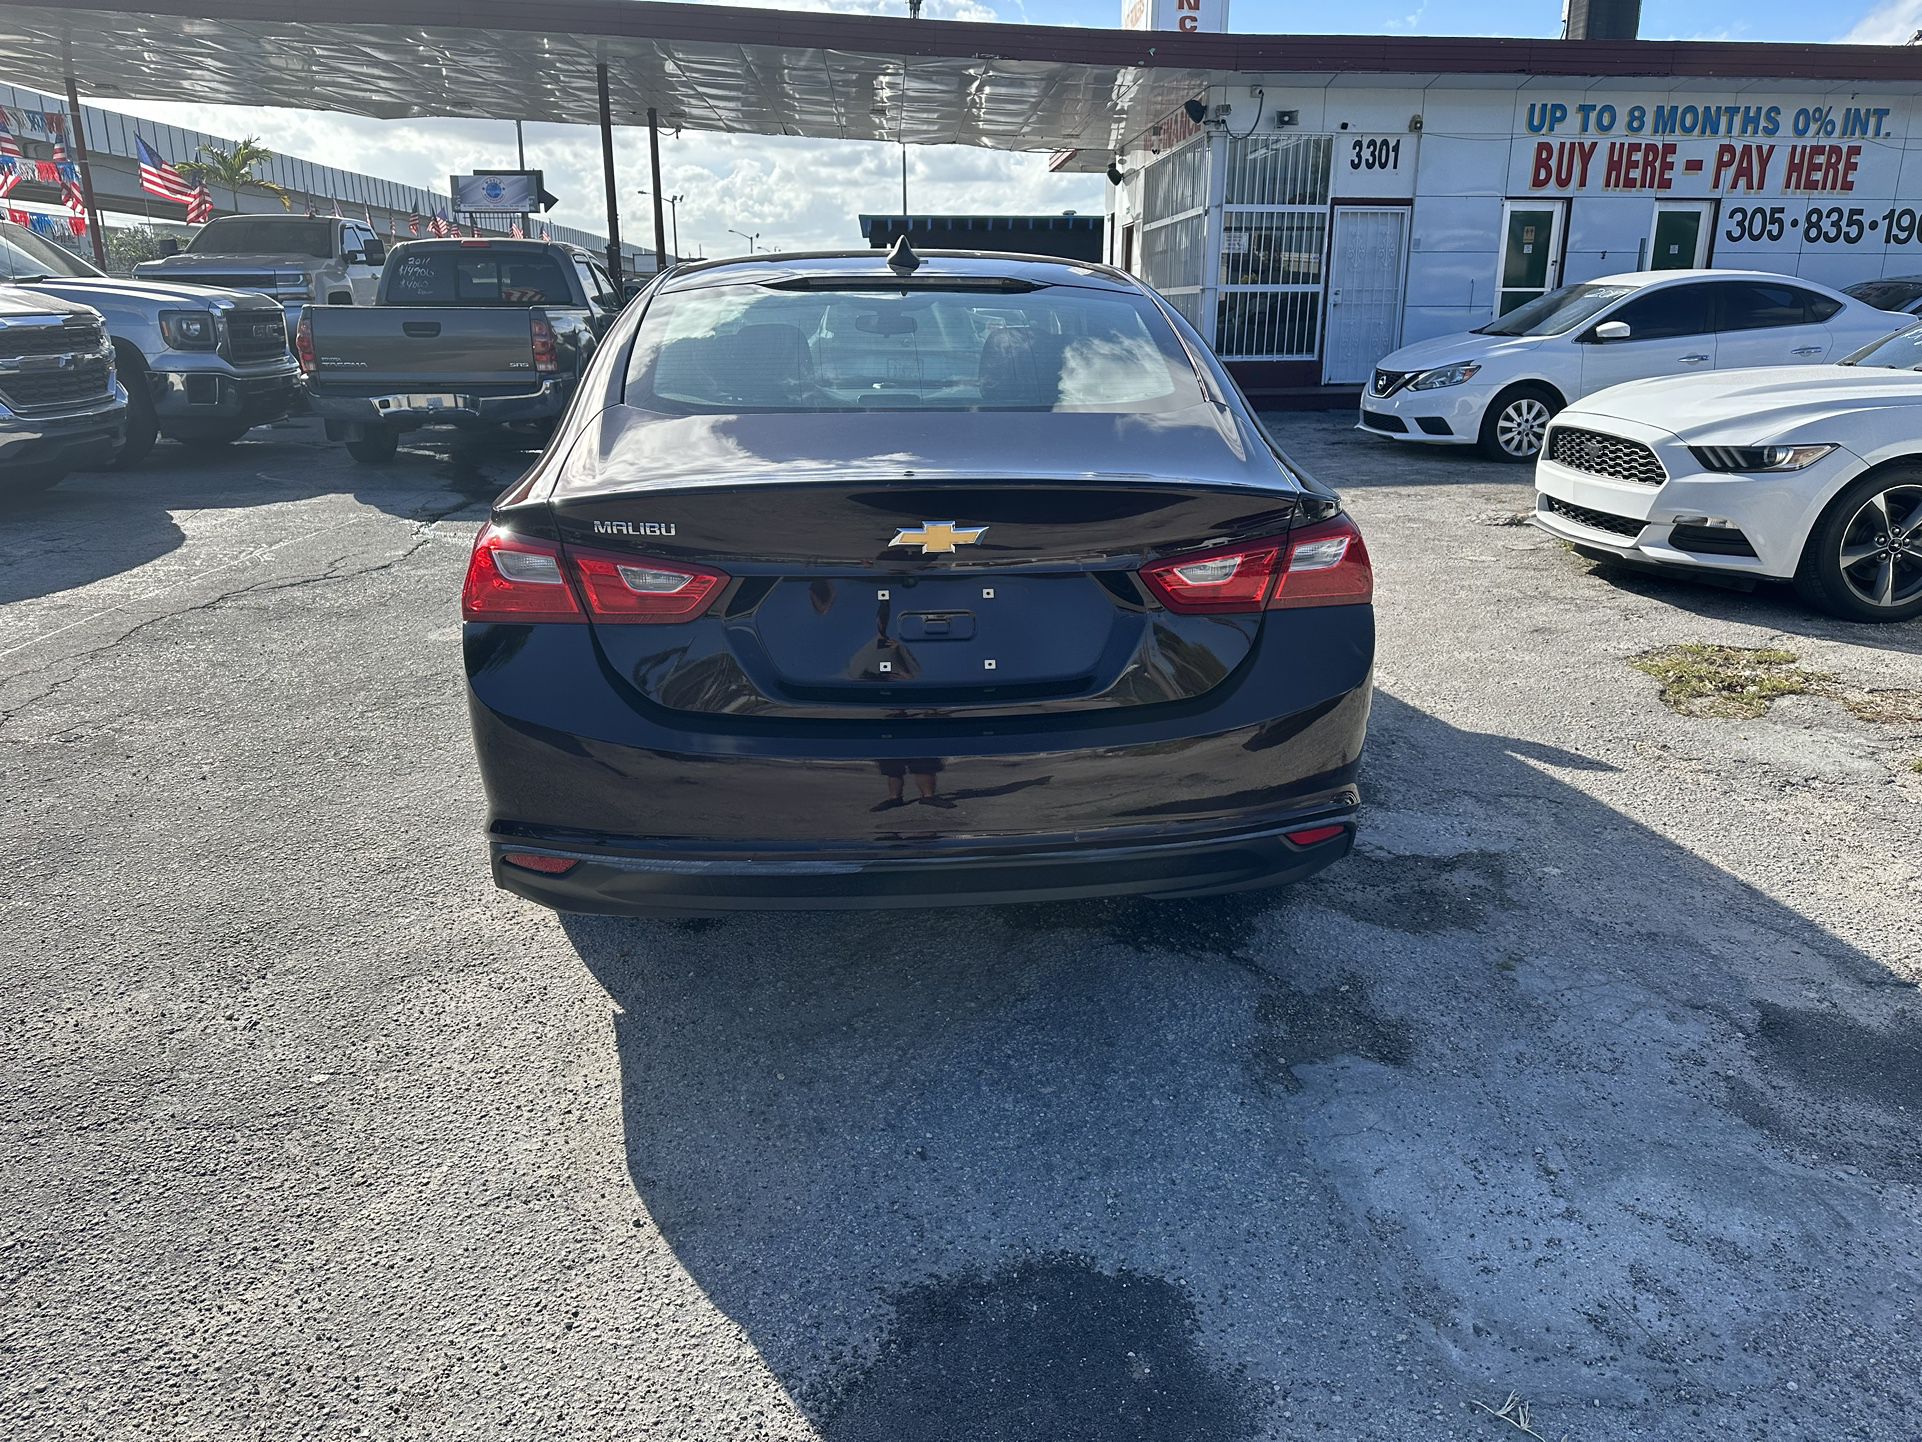 used 2020 CHEVY MALIBU - front view 3